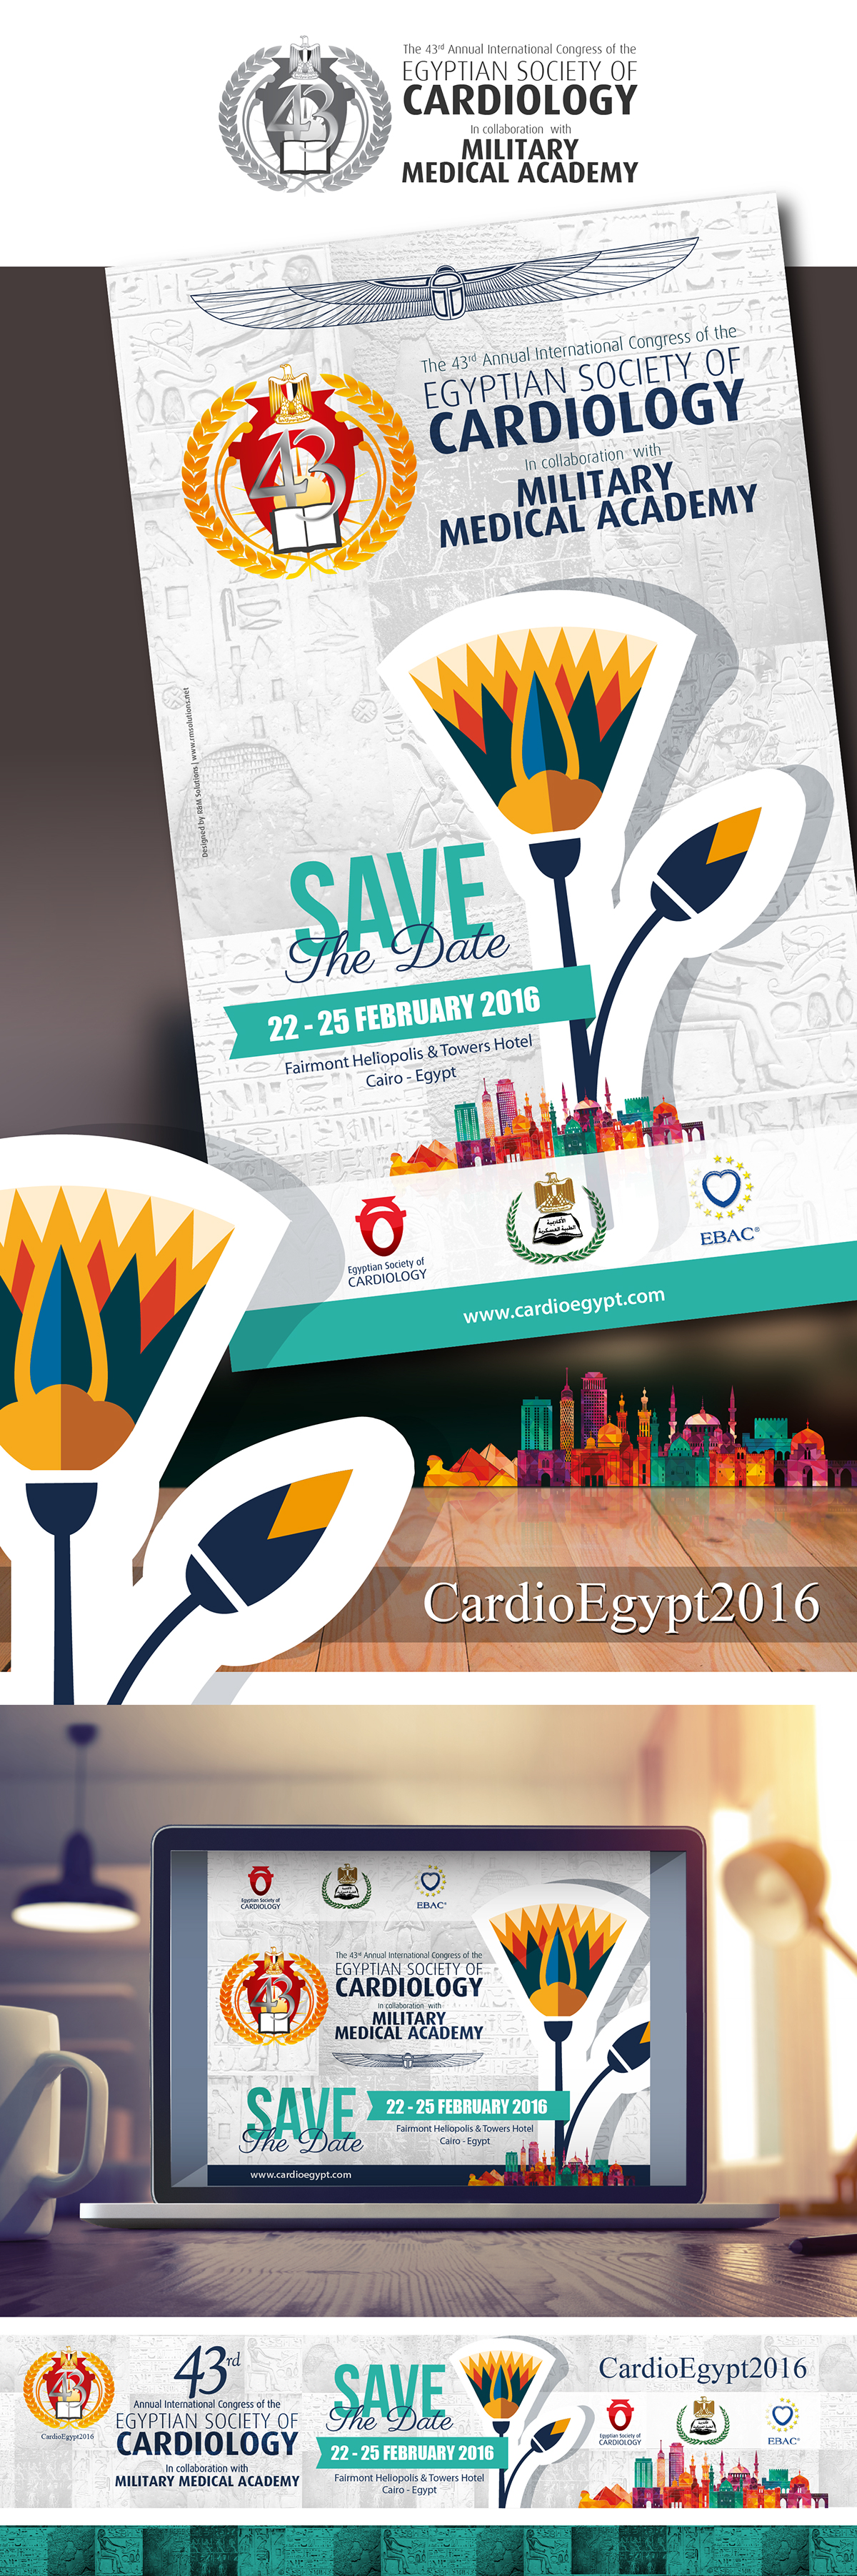 conference Theme Layout mass email egypt design flyer